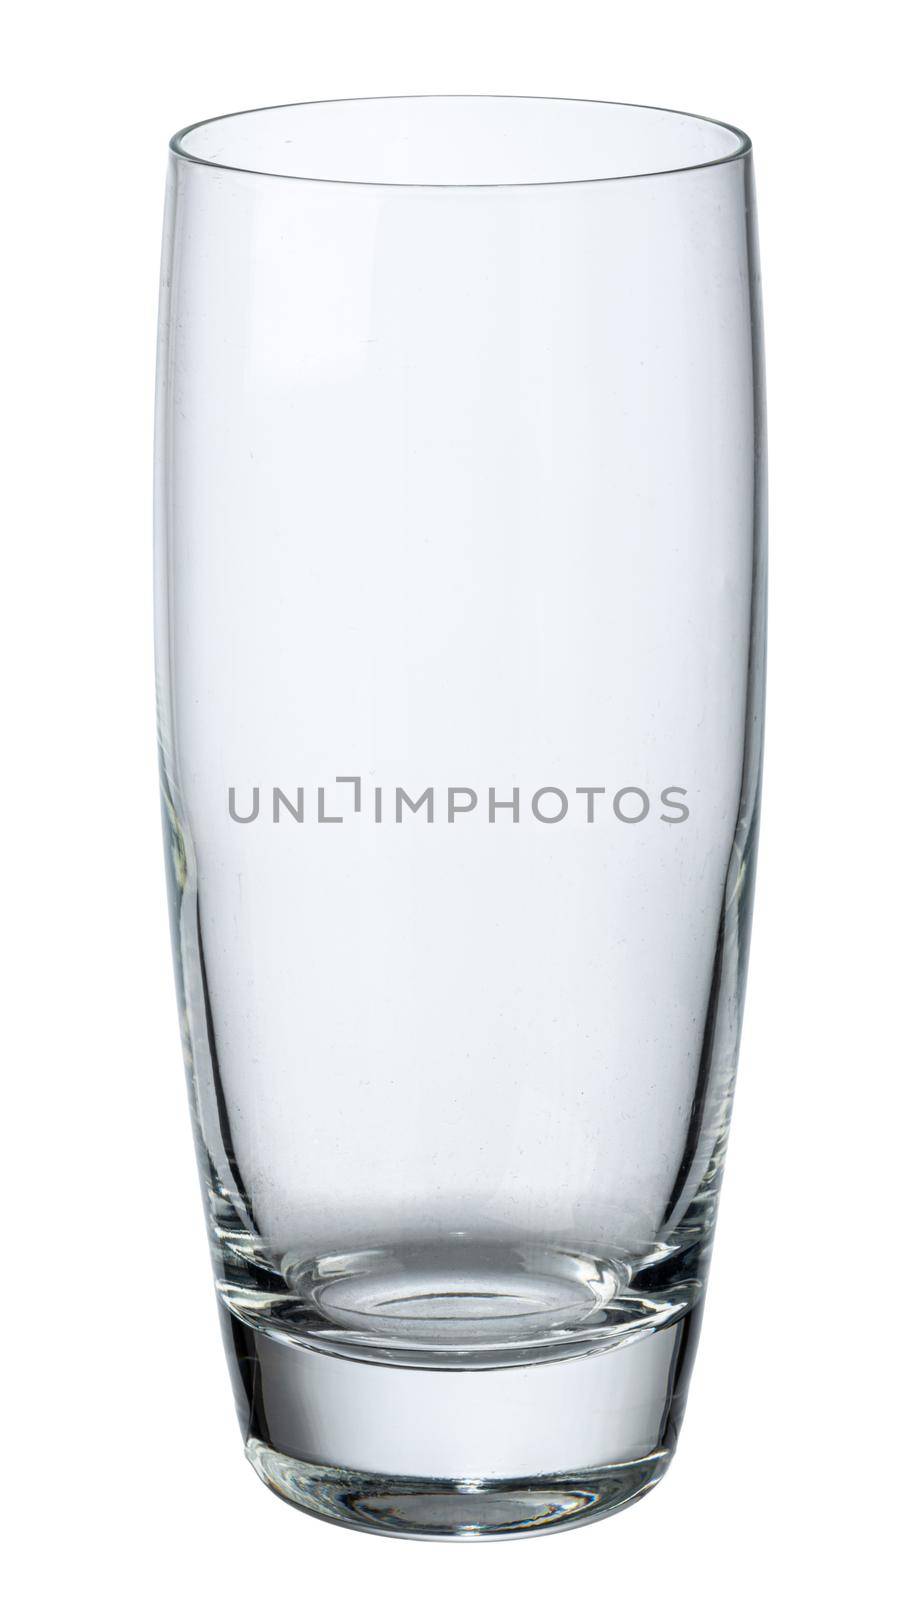 Empty glass cup isolated on white background by Fabrikasimf